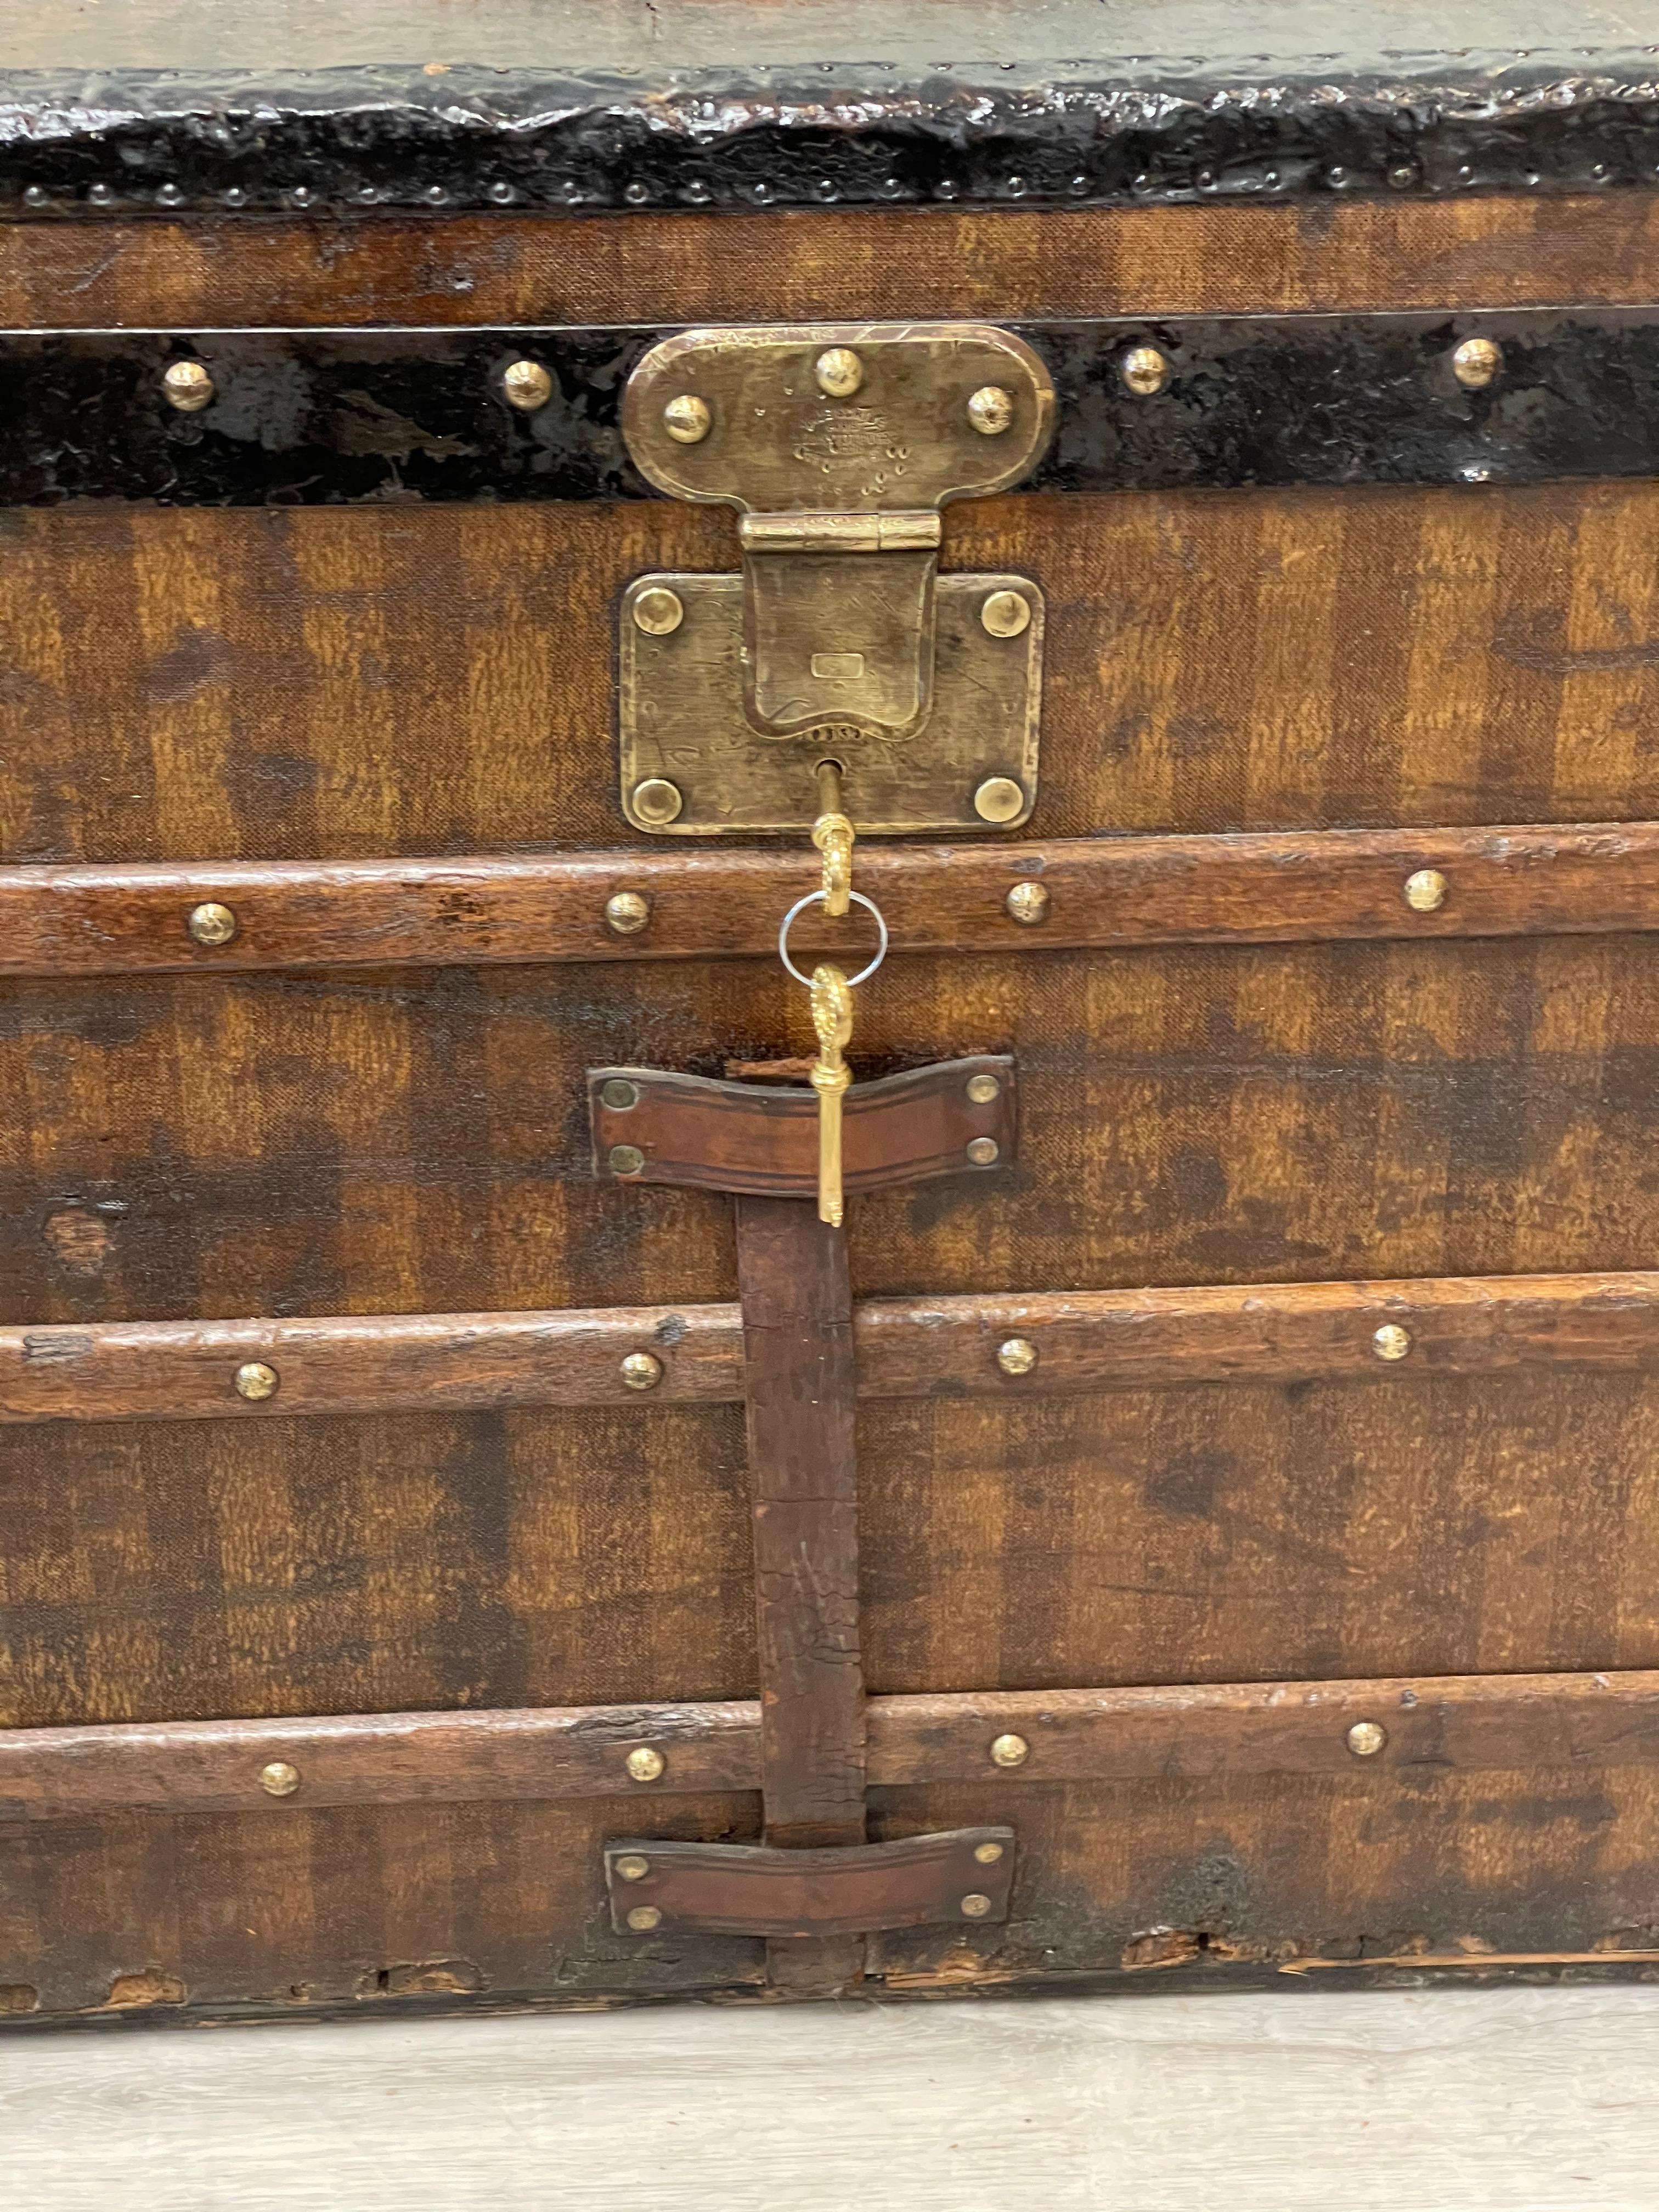 Rare antique Louis Vuitton striped shipping trunk, late 19th century; Louis Vuitton lock plate serial No. 10535, with Paris rue Scribe Address and London Oxford Street Address; bronze and metal hardware, iron handles, metal bottom. Original Louis